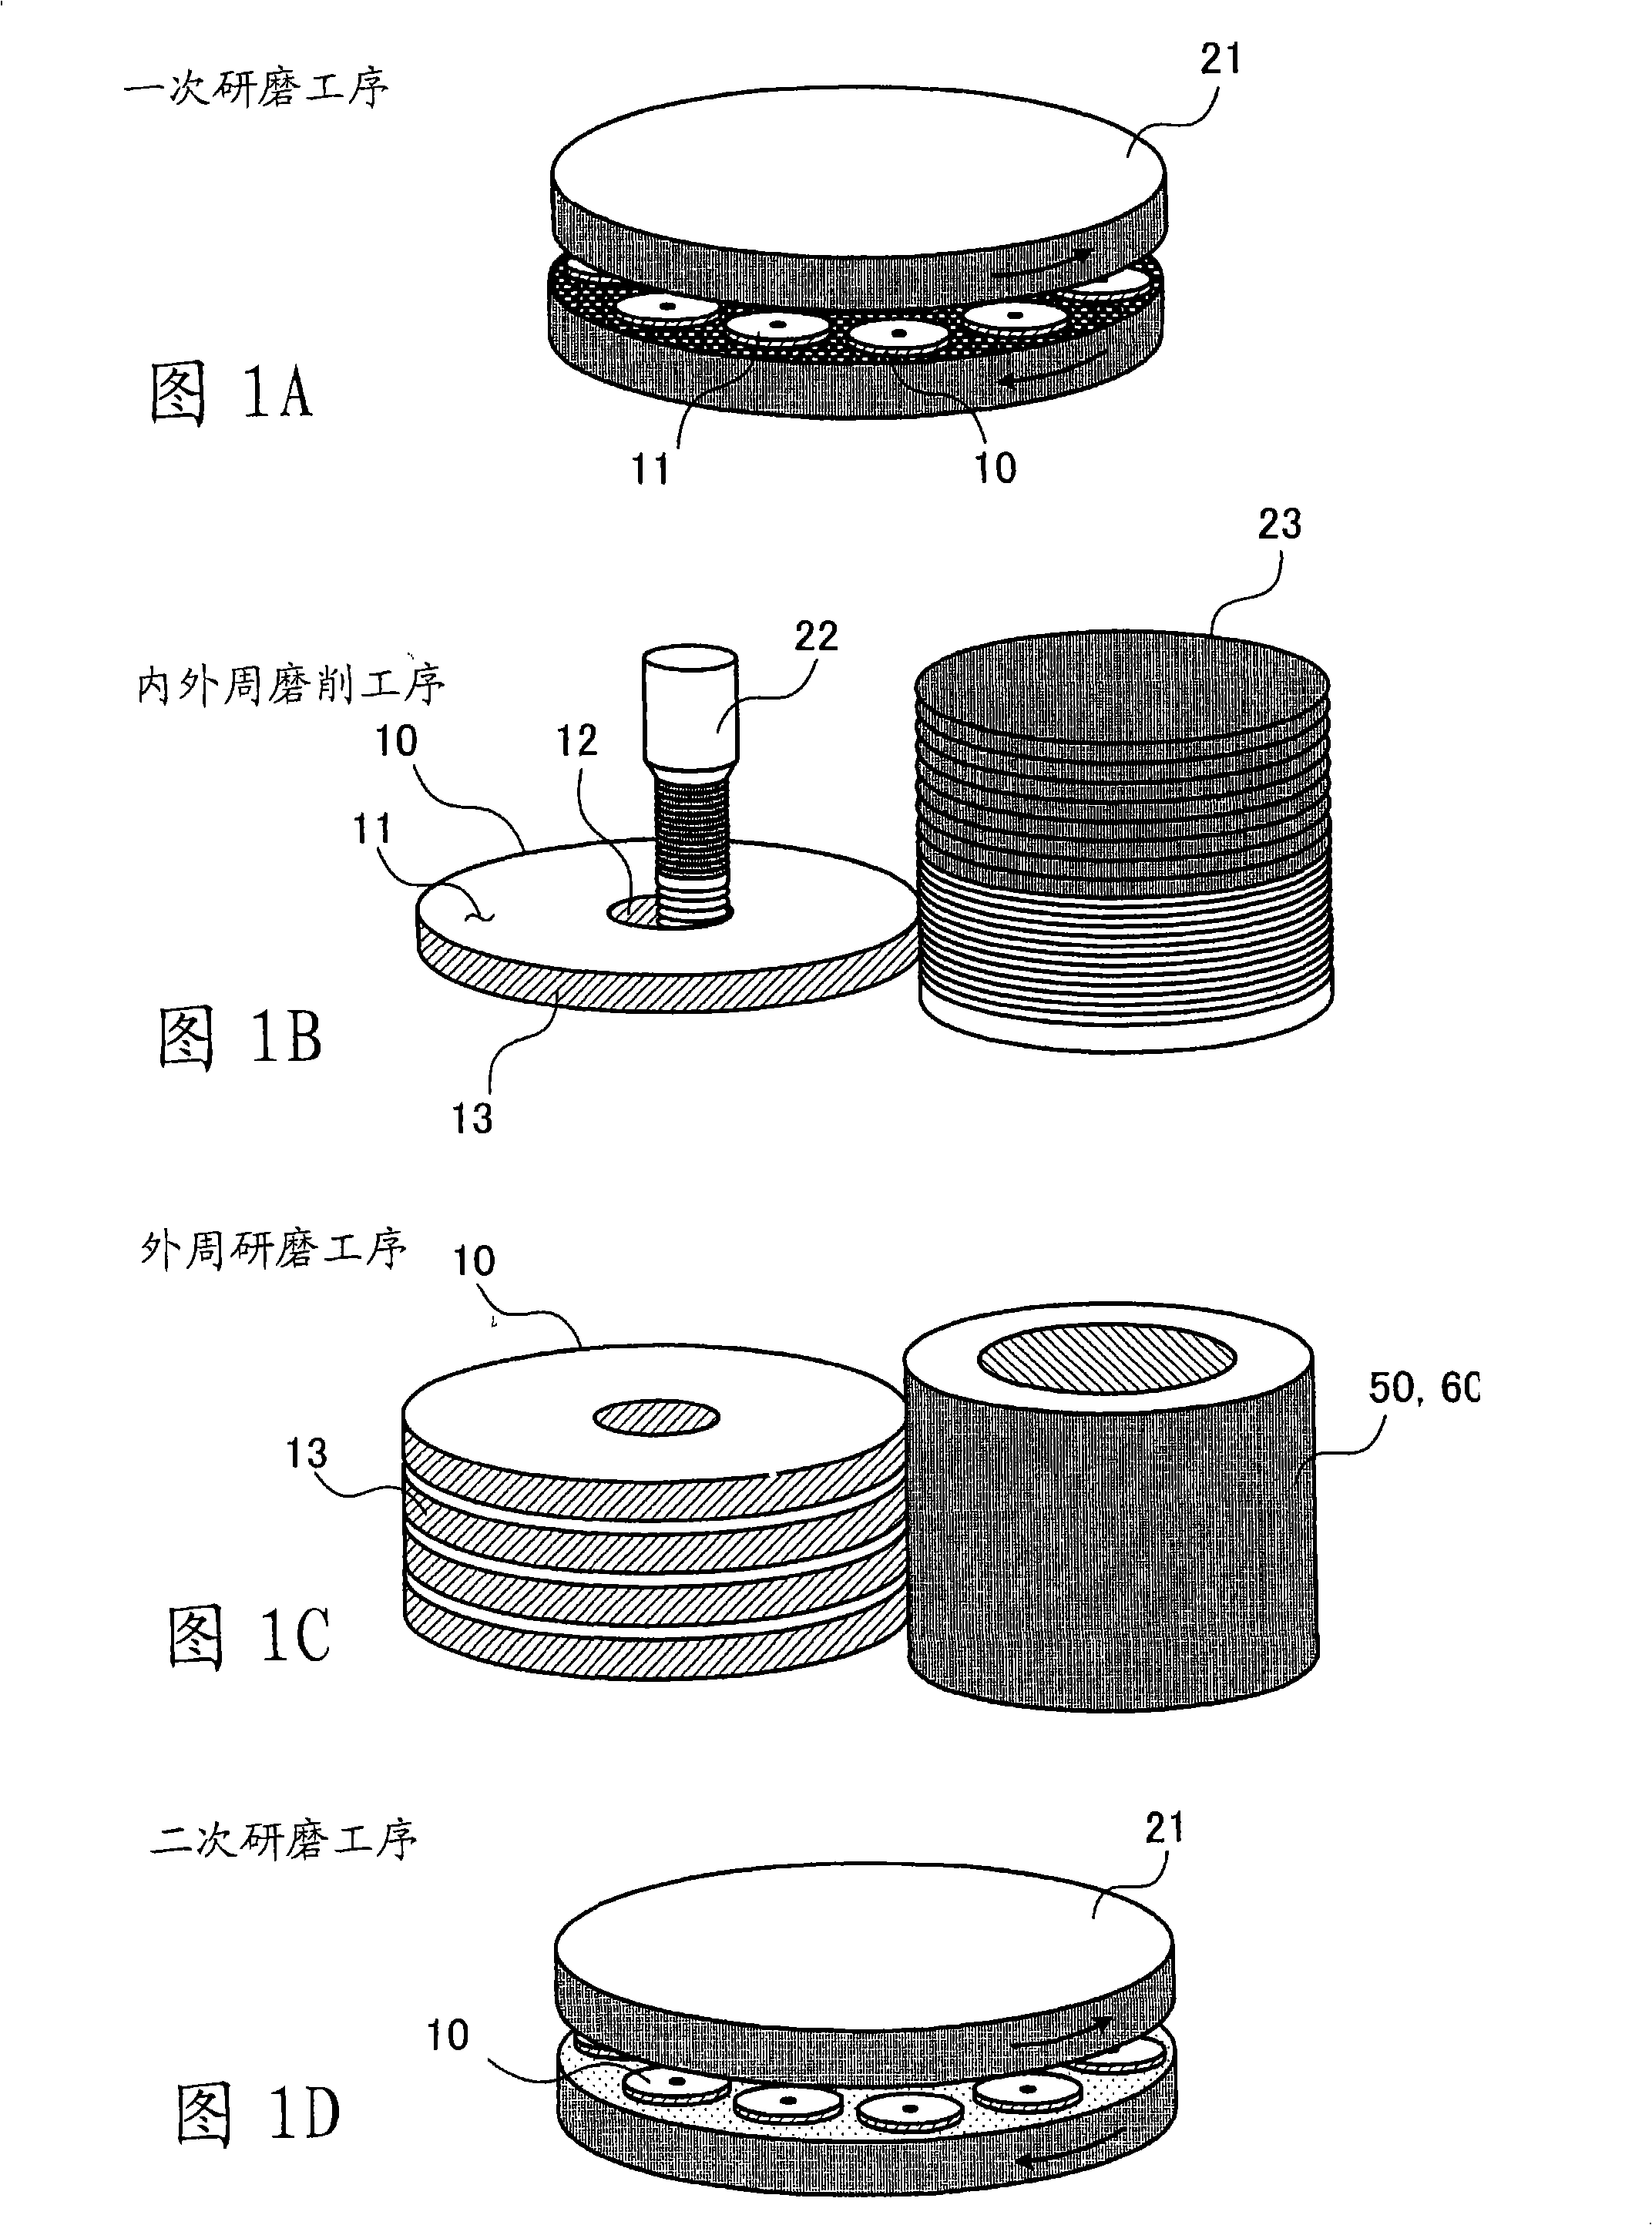 Disk-shaped substrate manufacturing method and washing apparatus